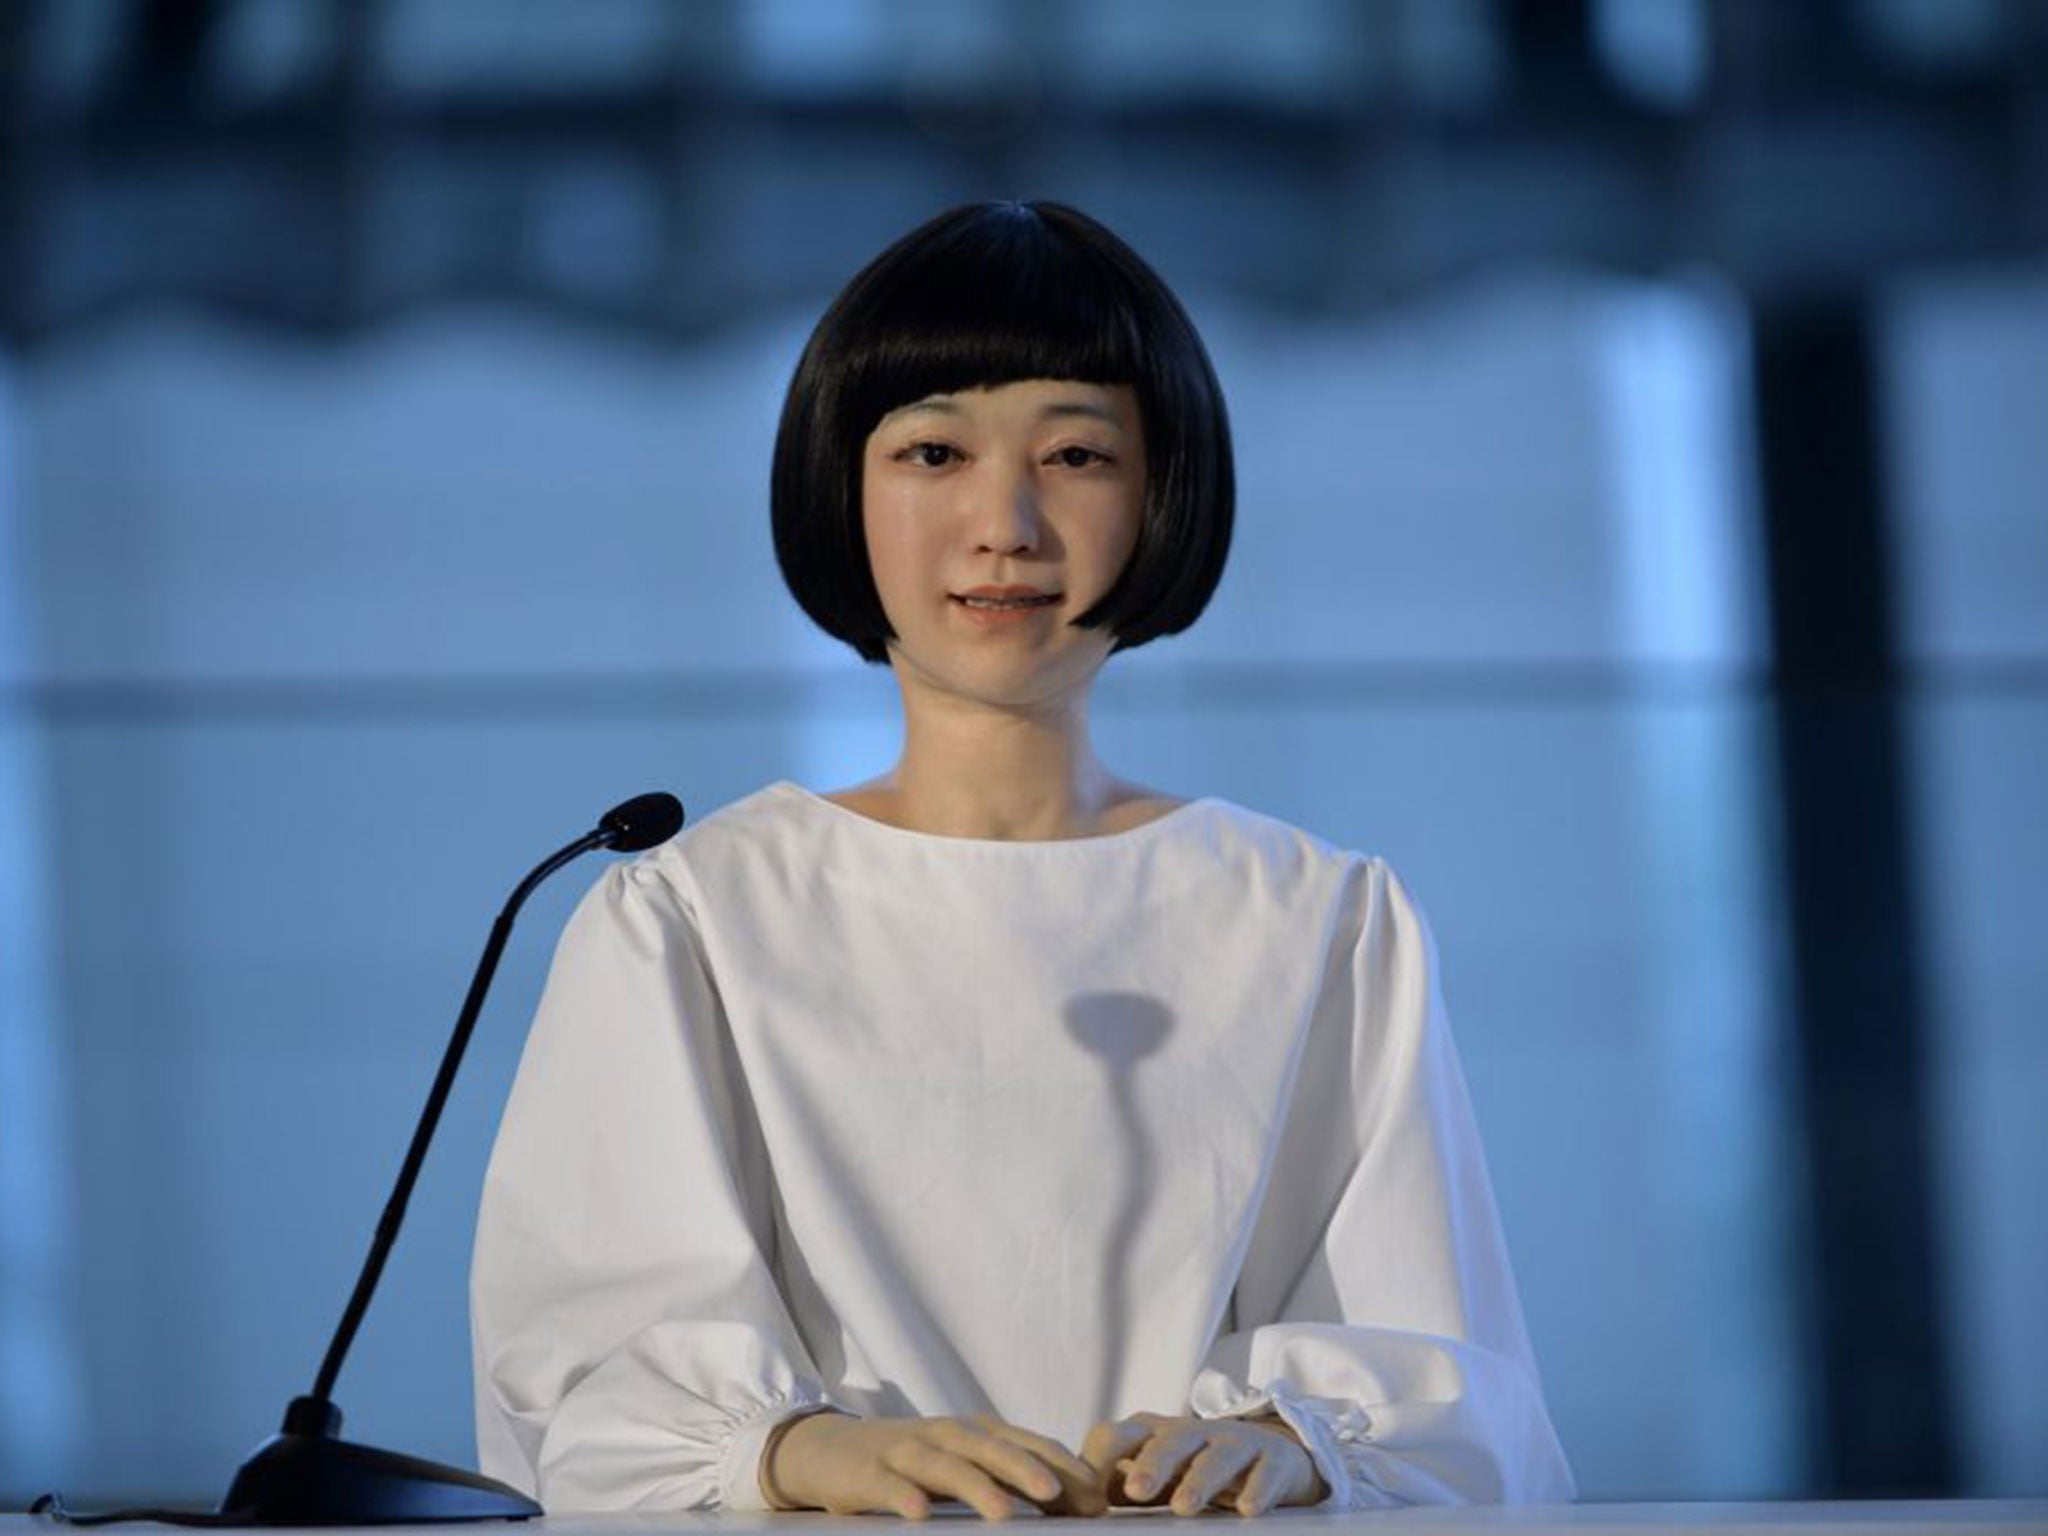 scientists create creepy robot newsreader with human face | The Independent | The Independent